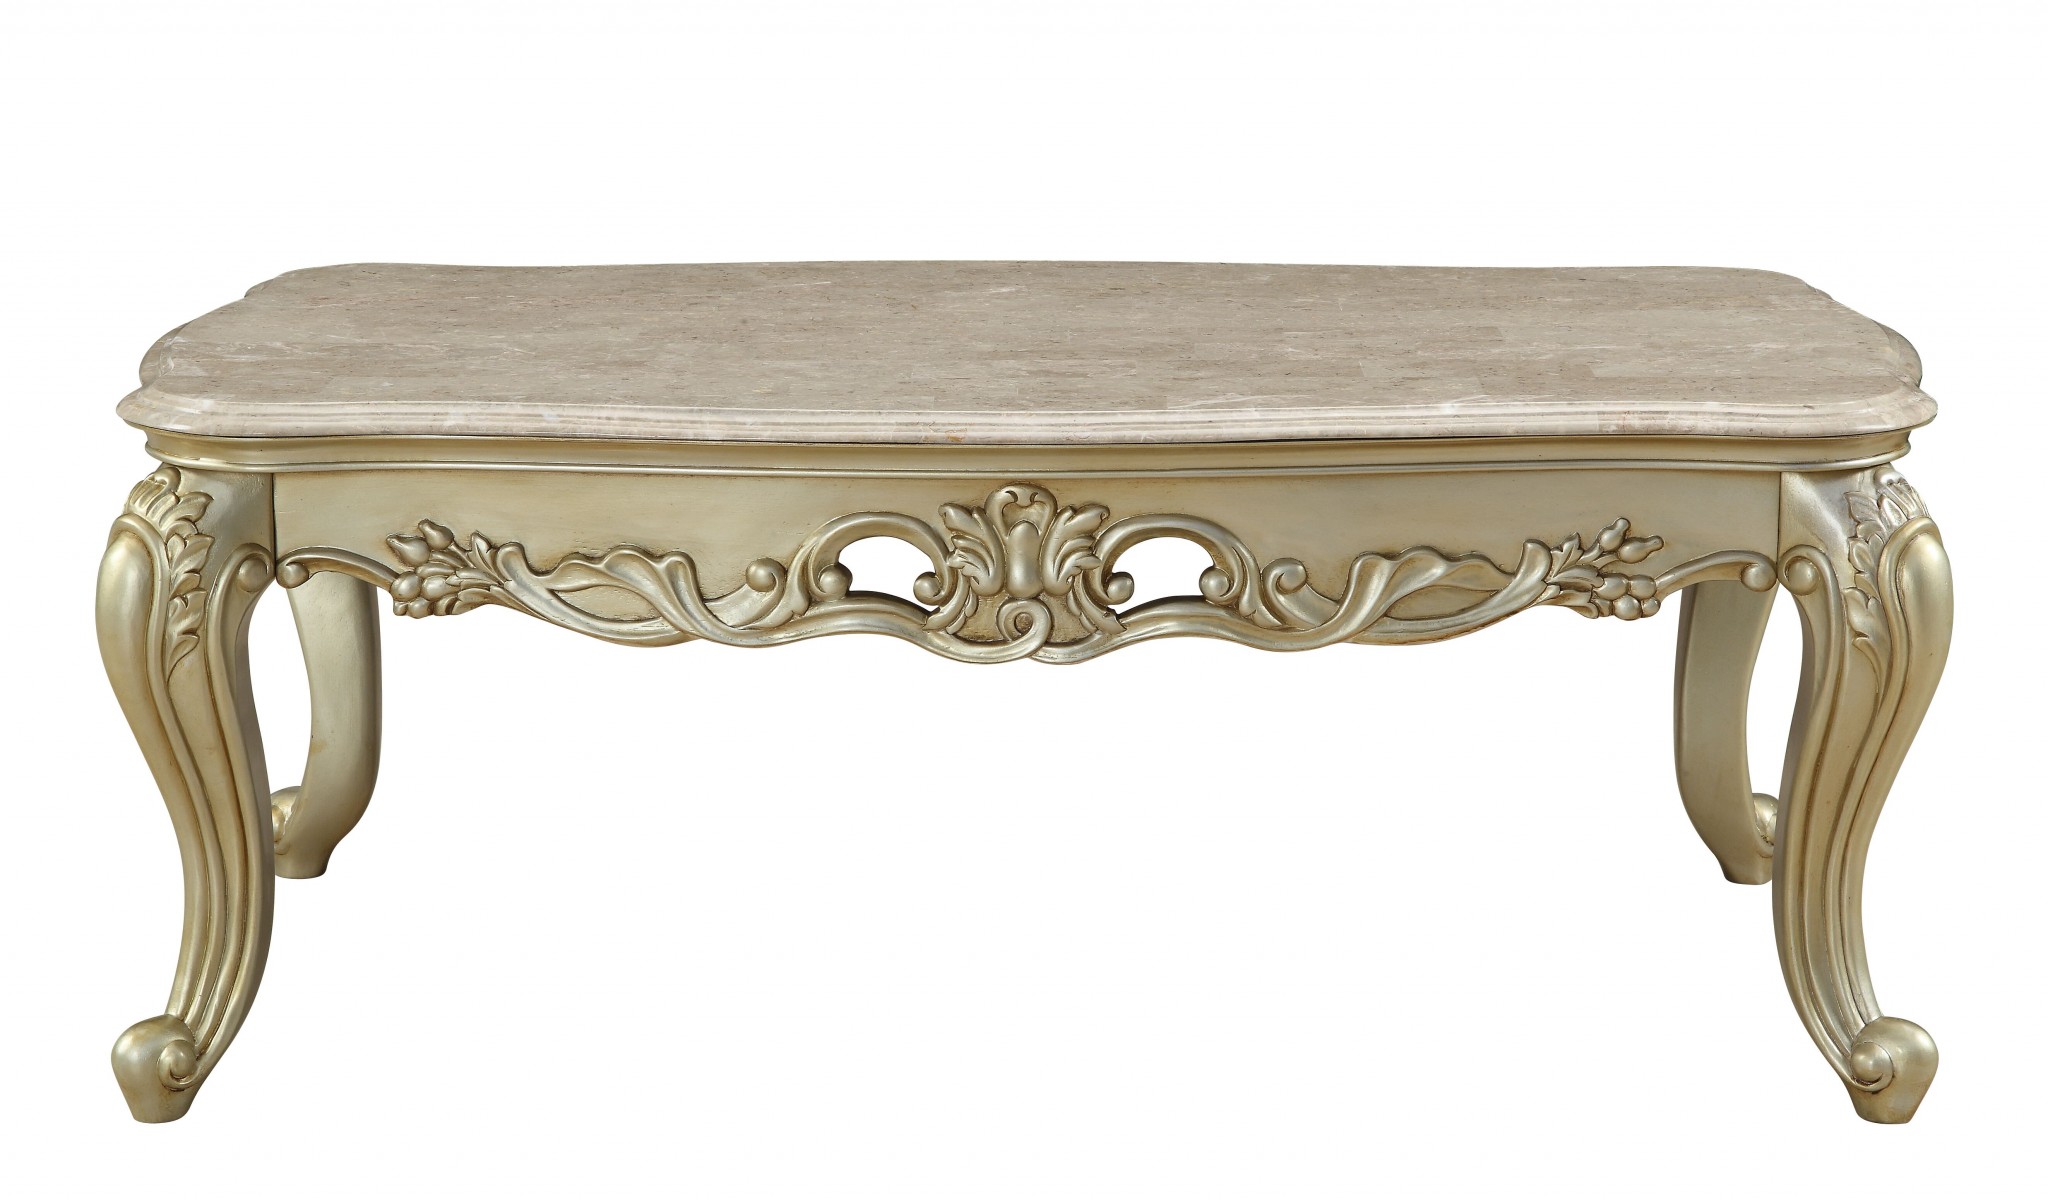 32" X 60" X 20" Marble Antique White Wood PolyResin Coffee Table